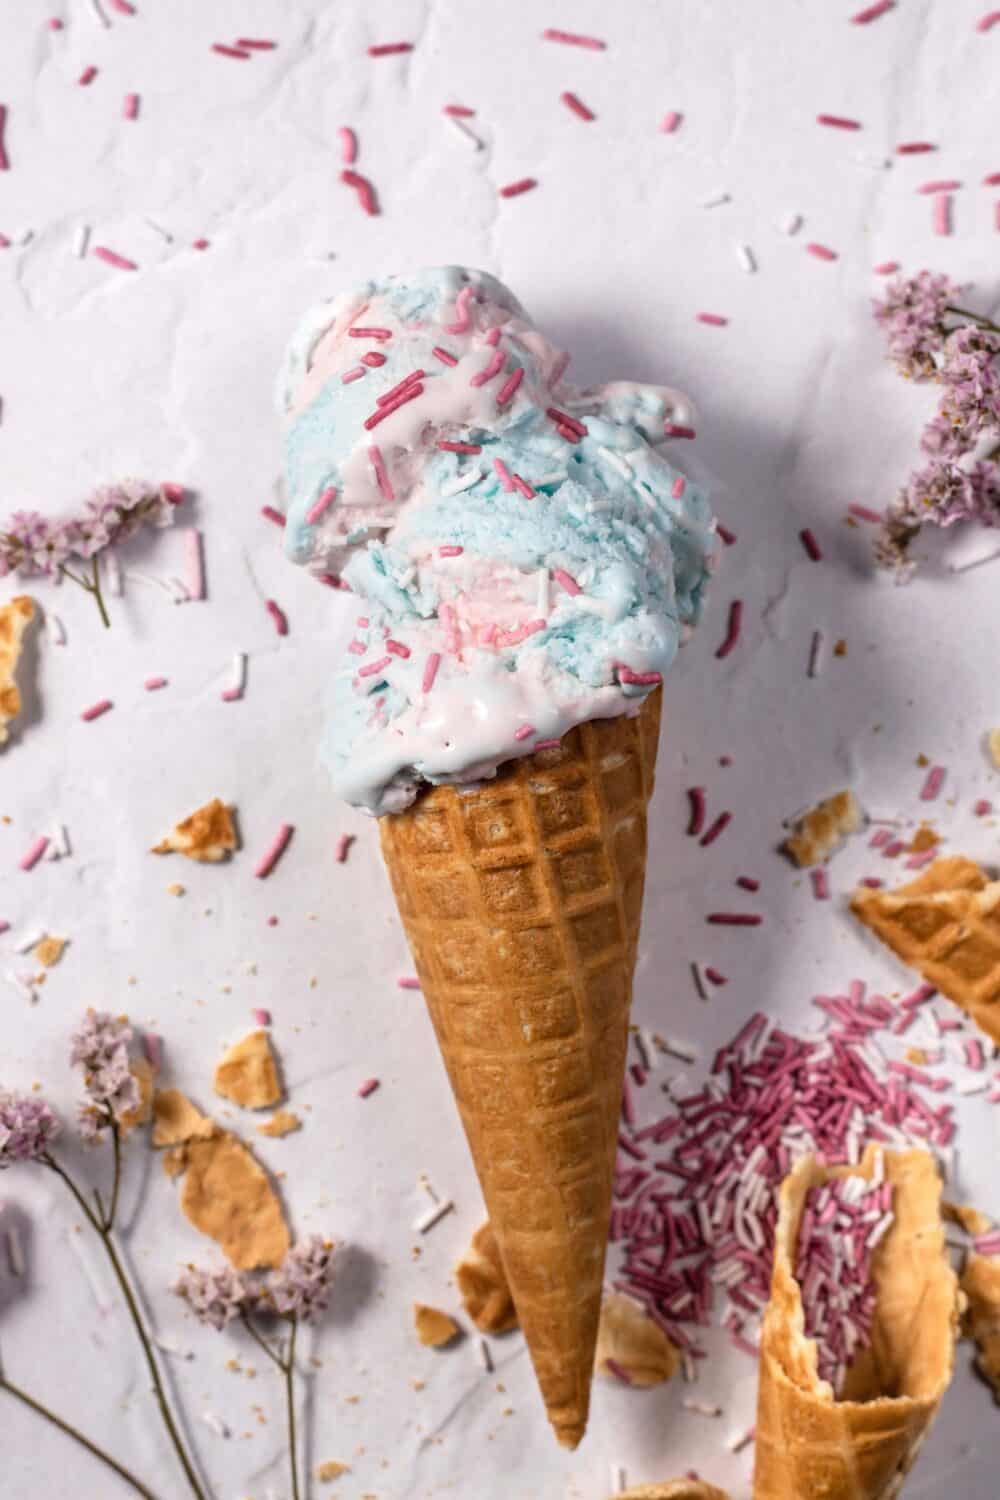 an ice cream cone full of homemade cotton candy ice cream topped with sprinkles